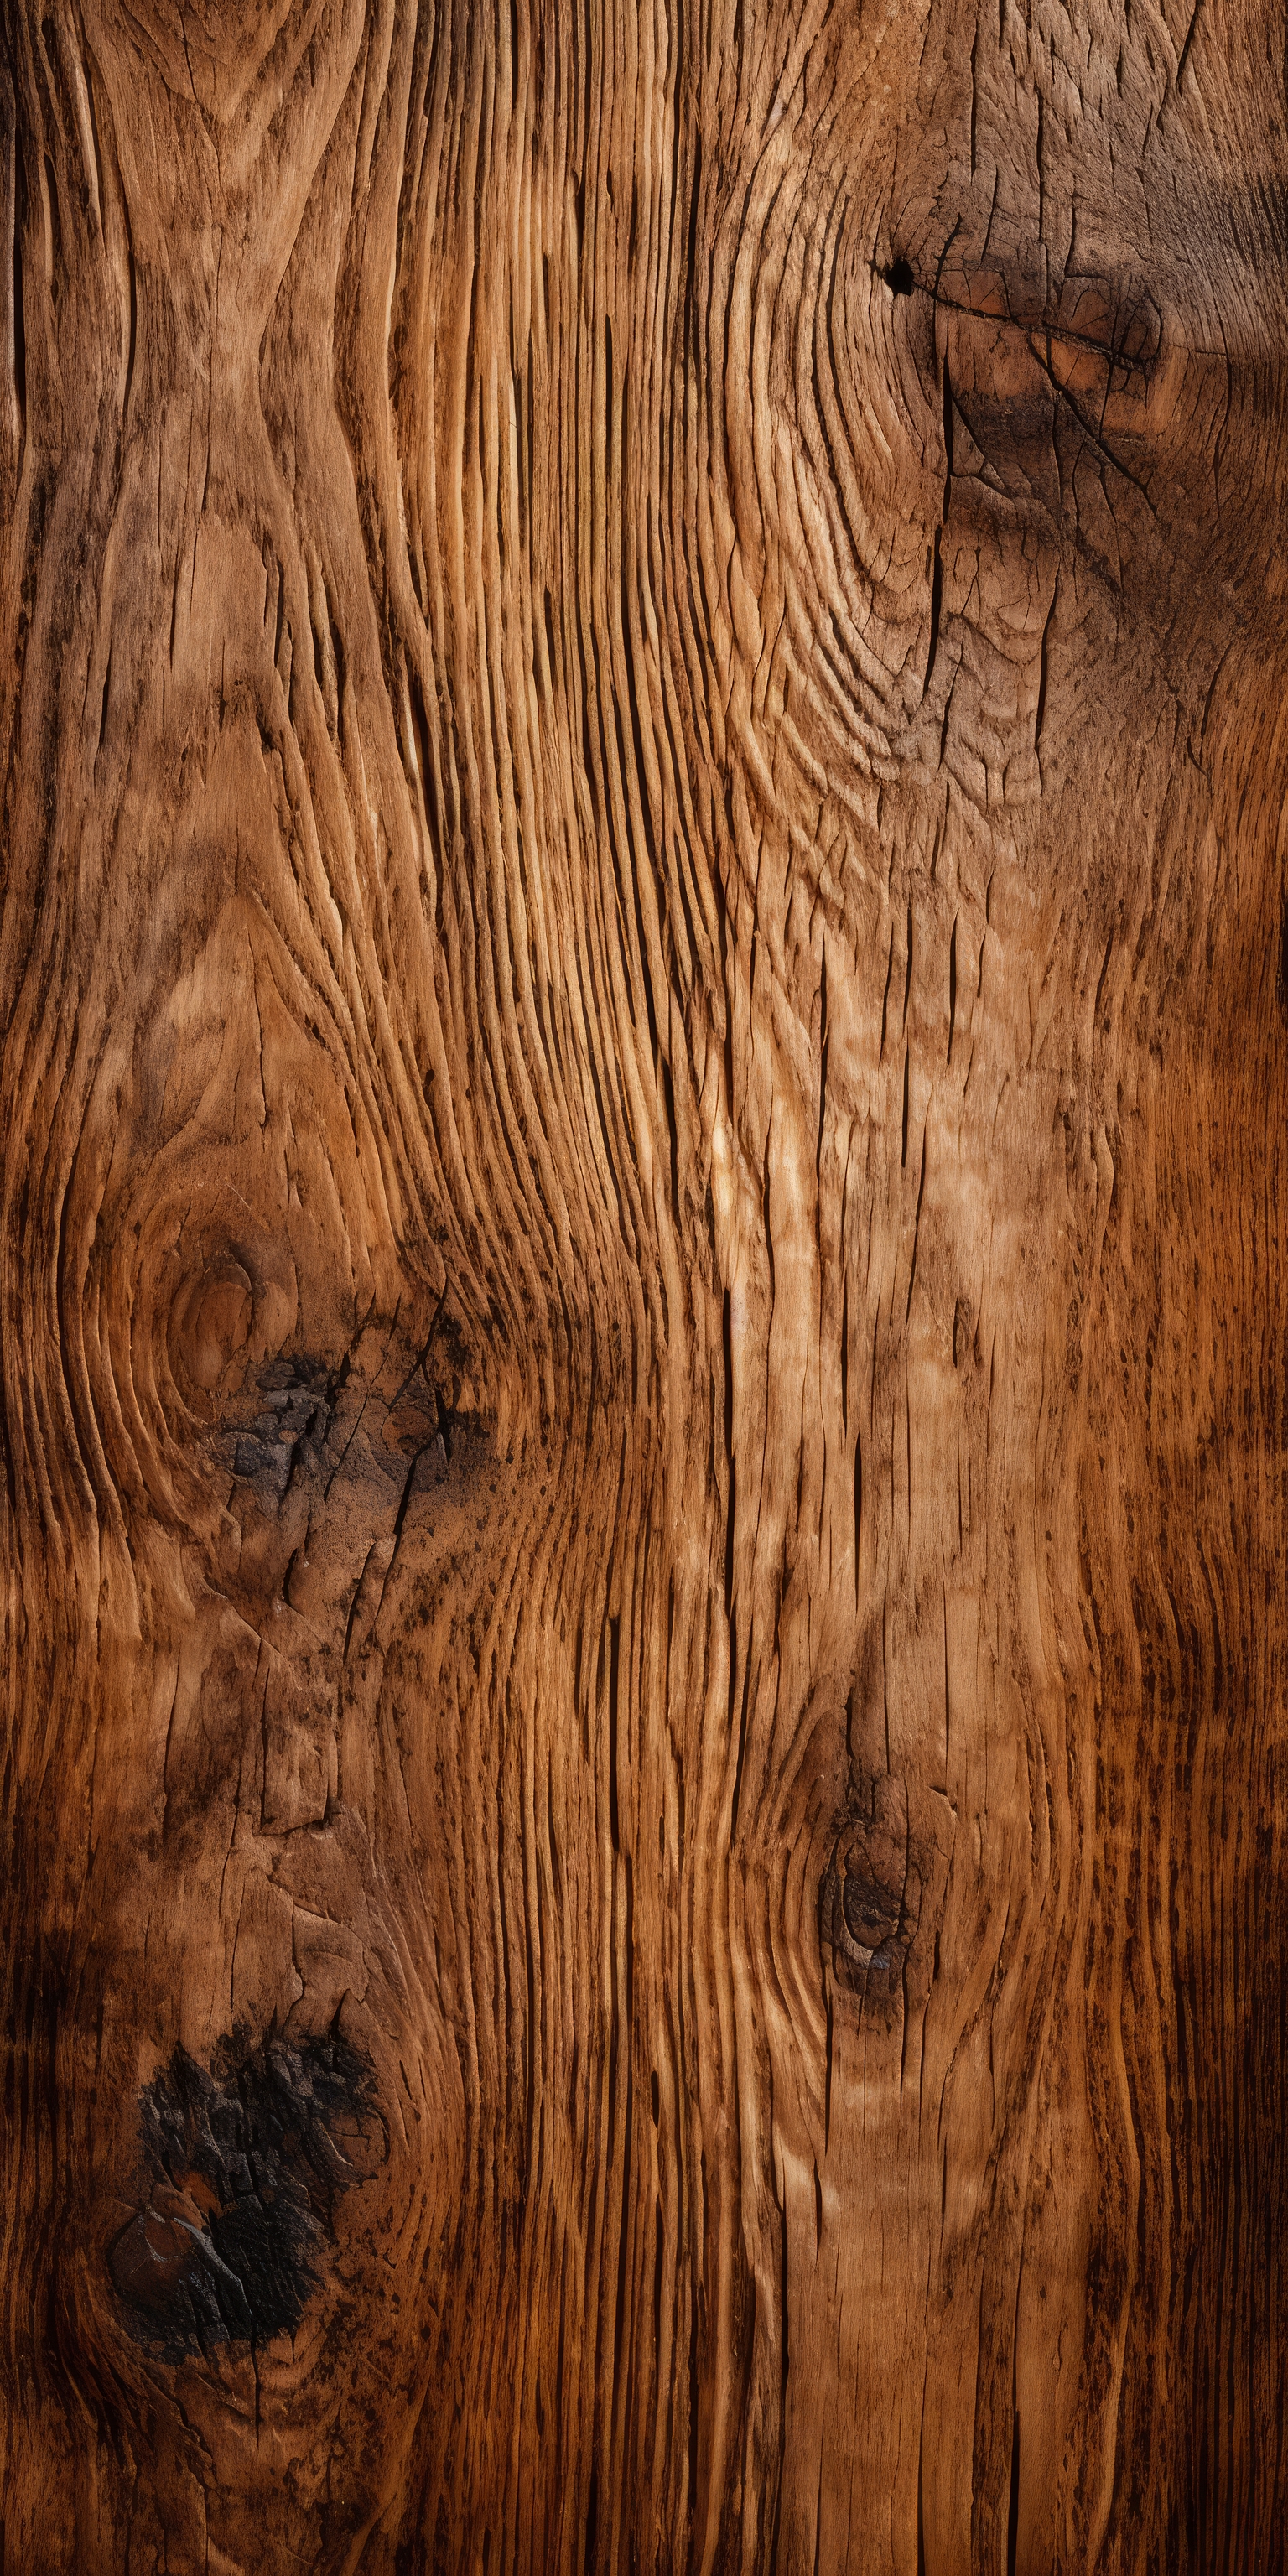 General 1536x3072 AI art portrait display wood texture wood texture dark simple background wooden surface